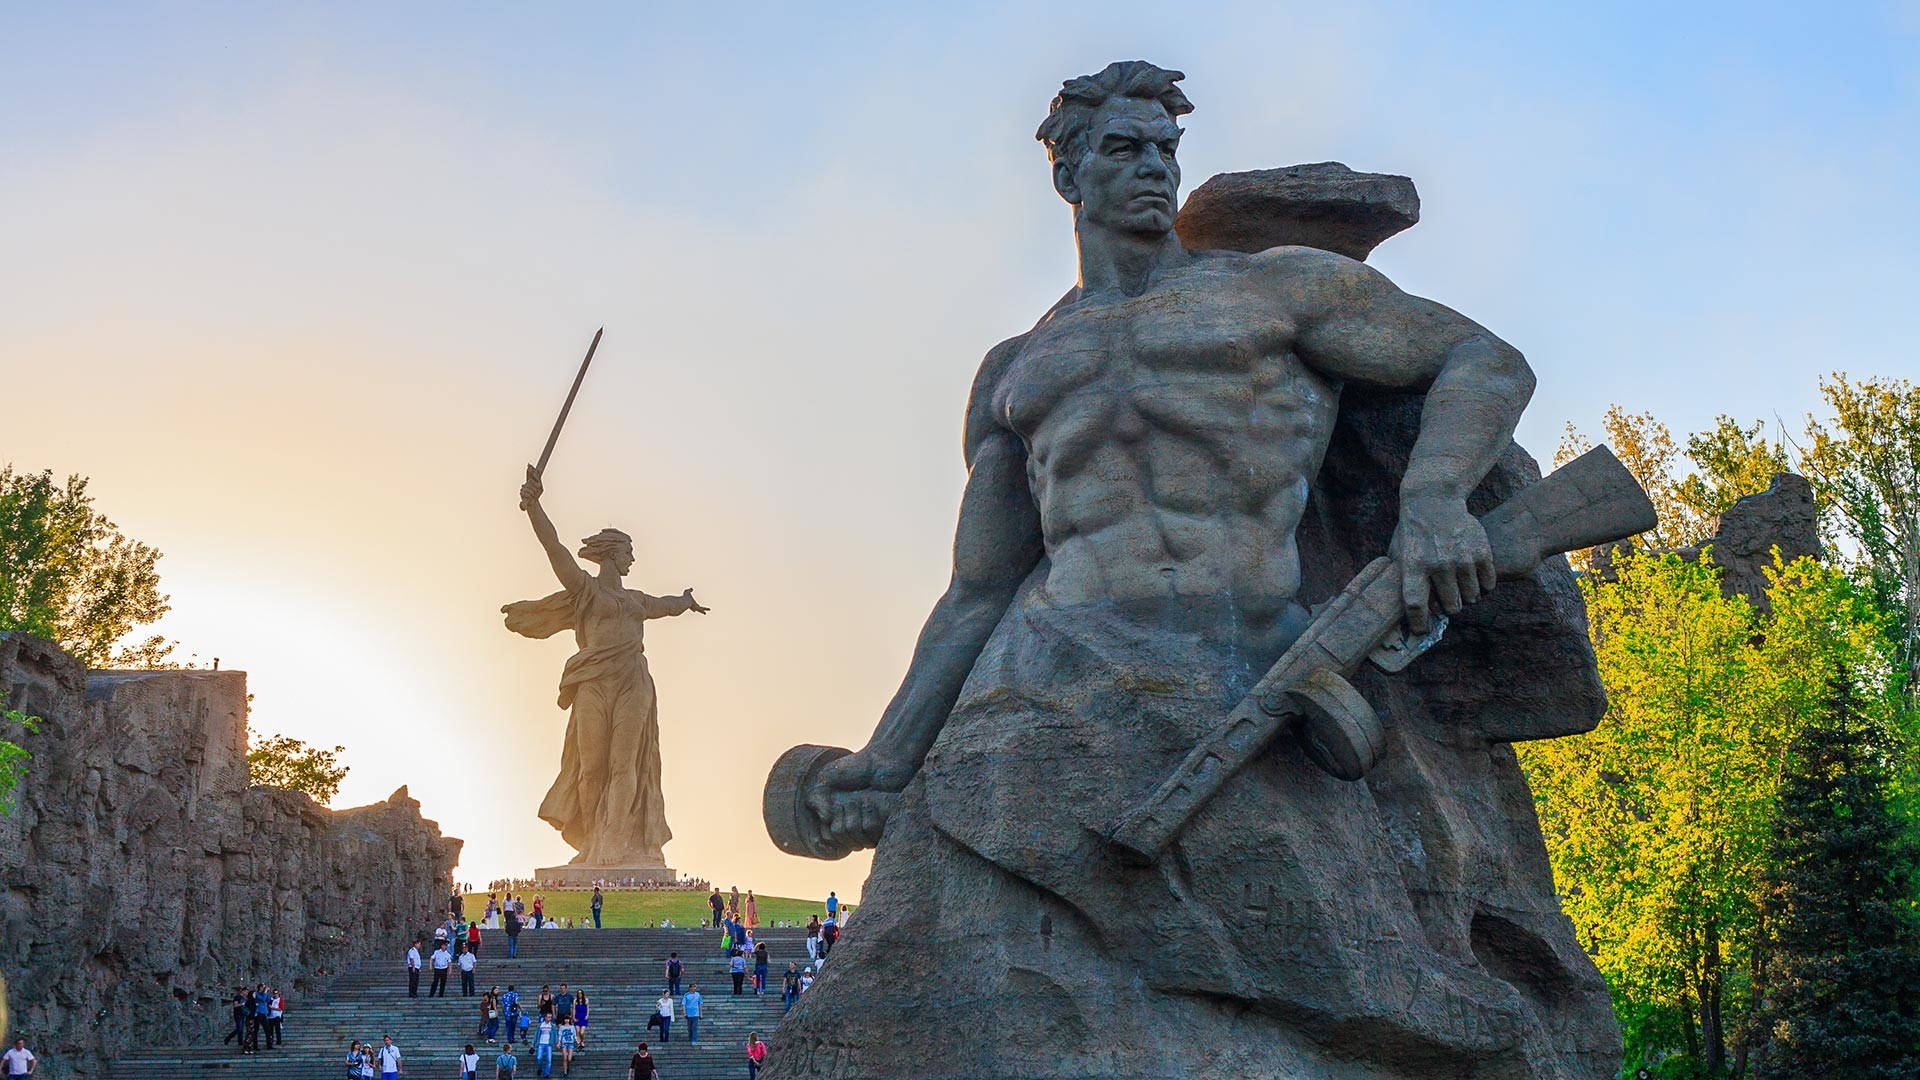 Monument-ensemble 'Heroes of the Battle of Stalingrad' in Volgograd.